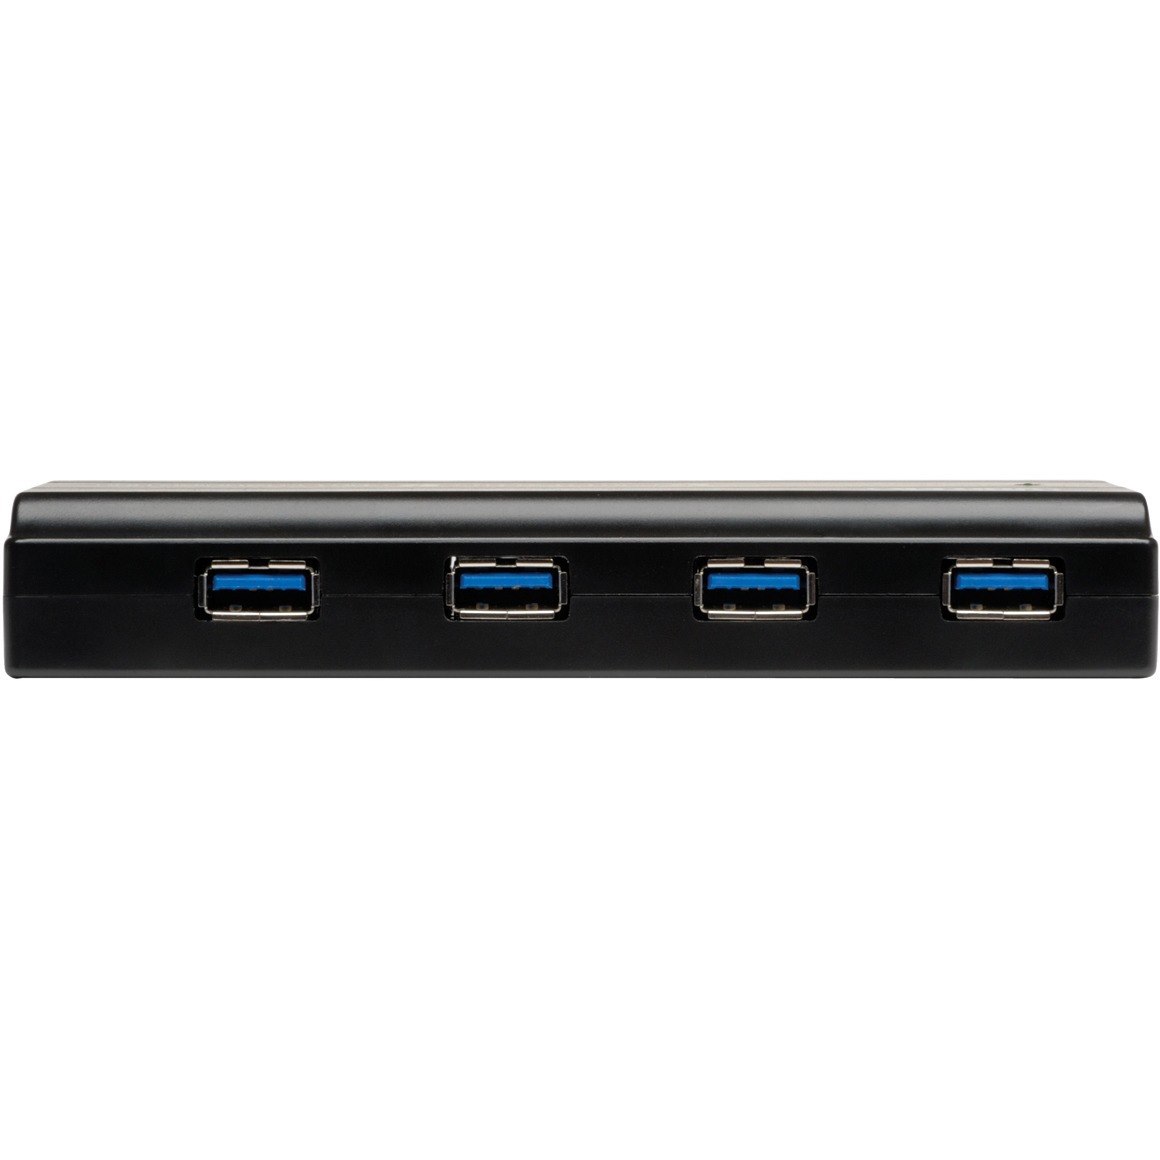 Tripp Lite by Eaton 7-Port USB 3.0 Hub SuperSpeed with Dedicated 2A USB Charging iPad Tablet